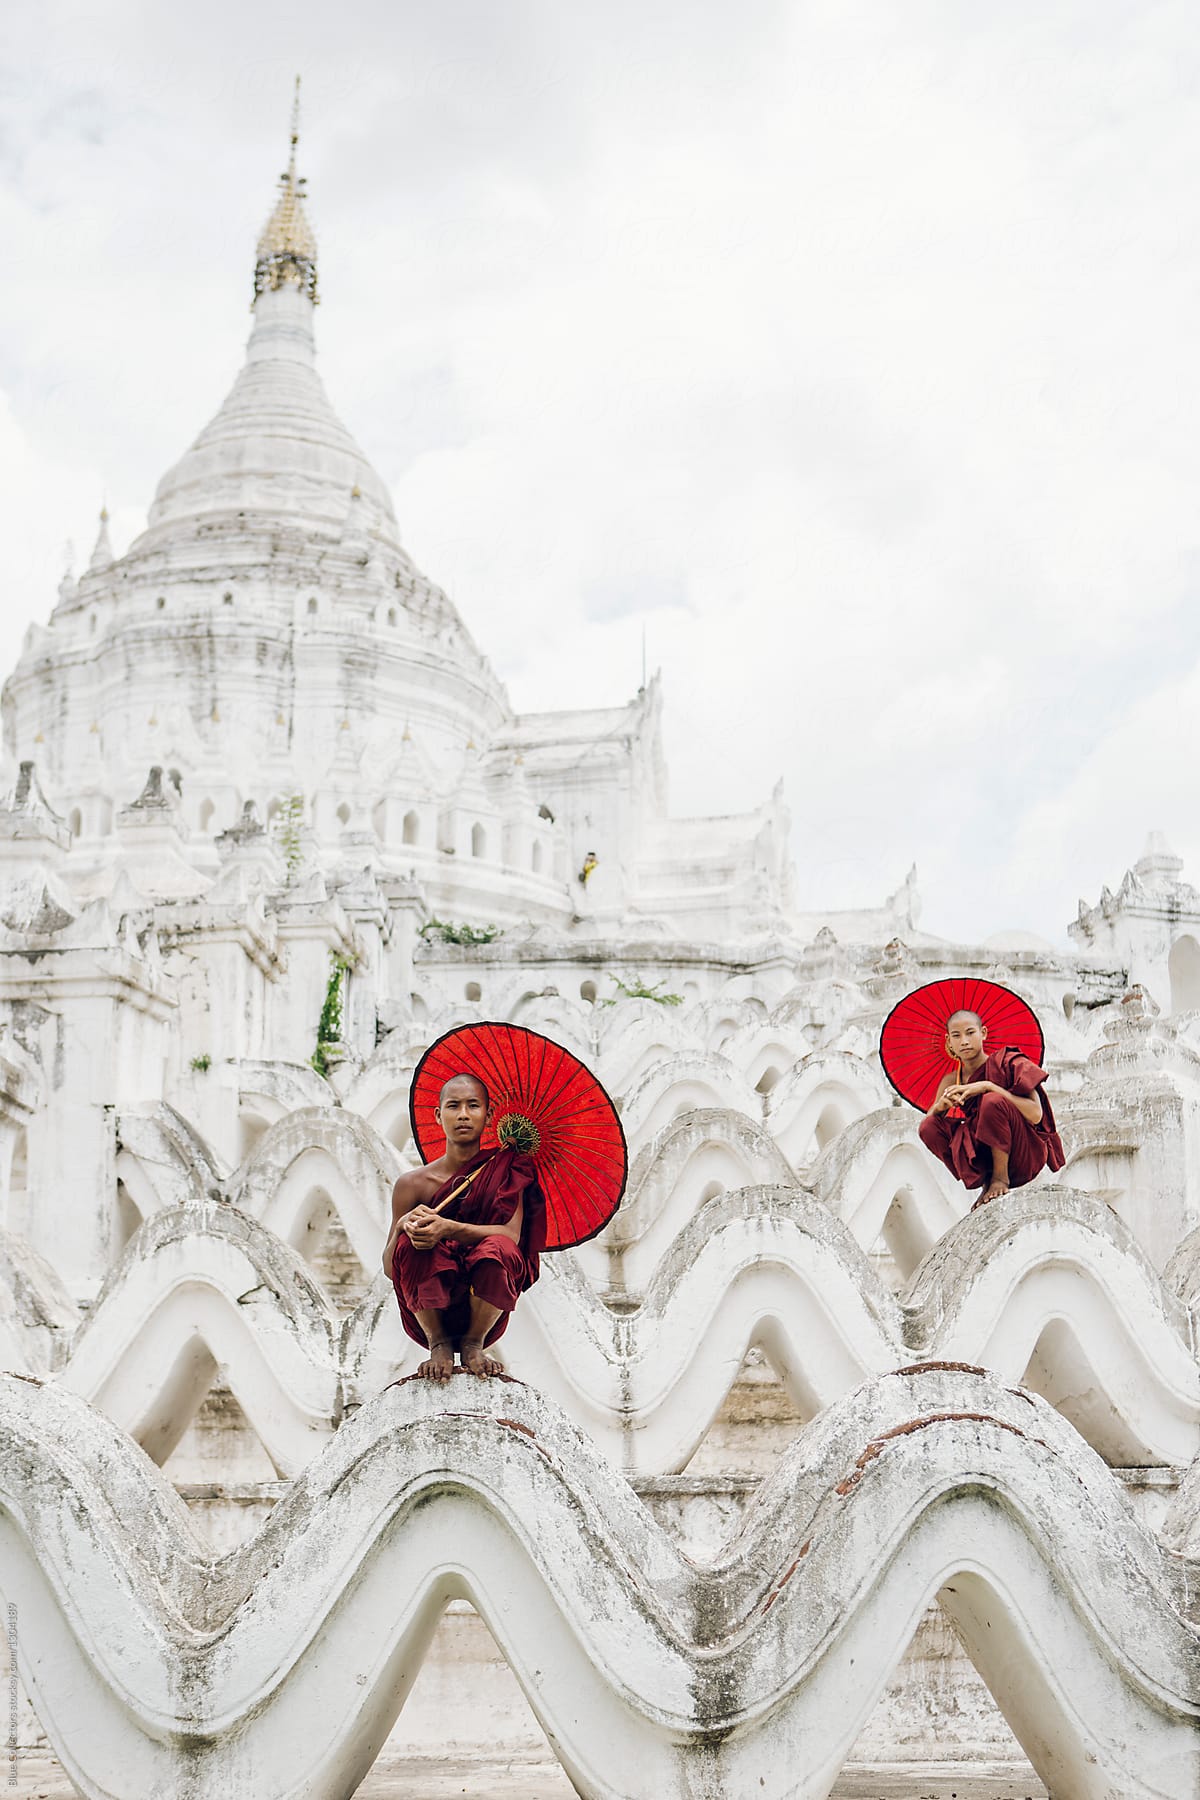 Two novice Buddhist monks with a red umbrellas in a Hsinbyume Temple